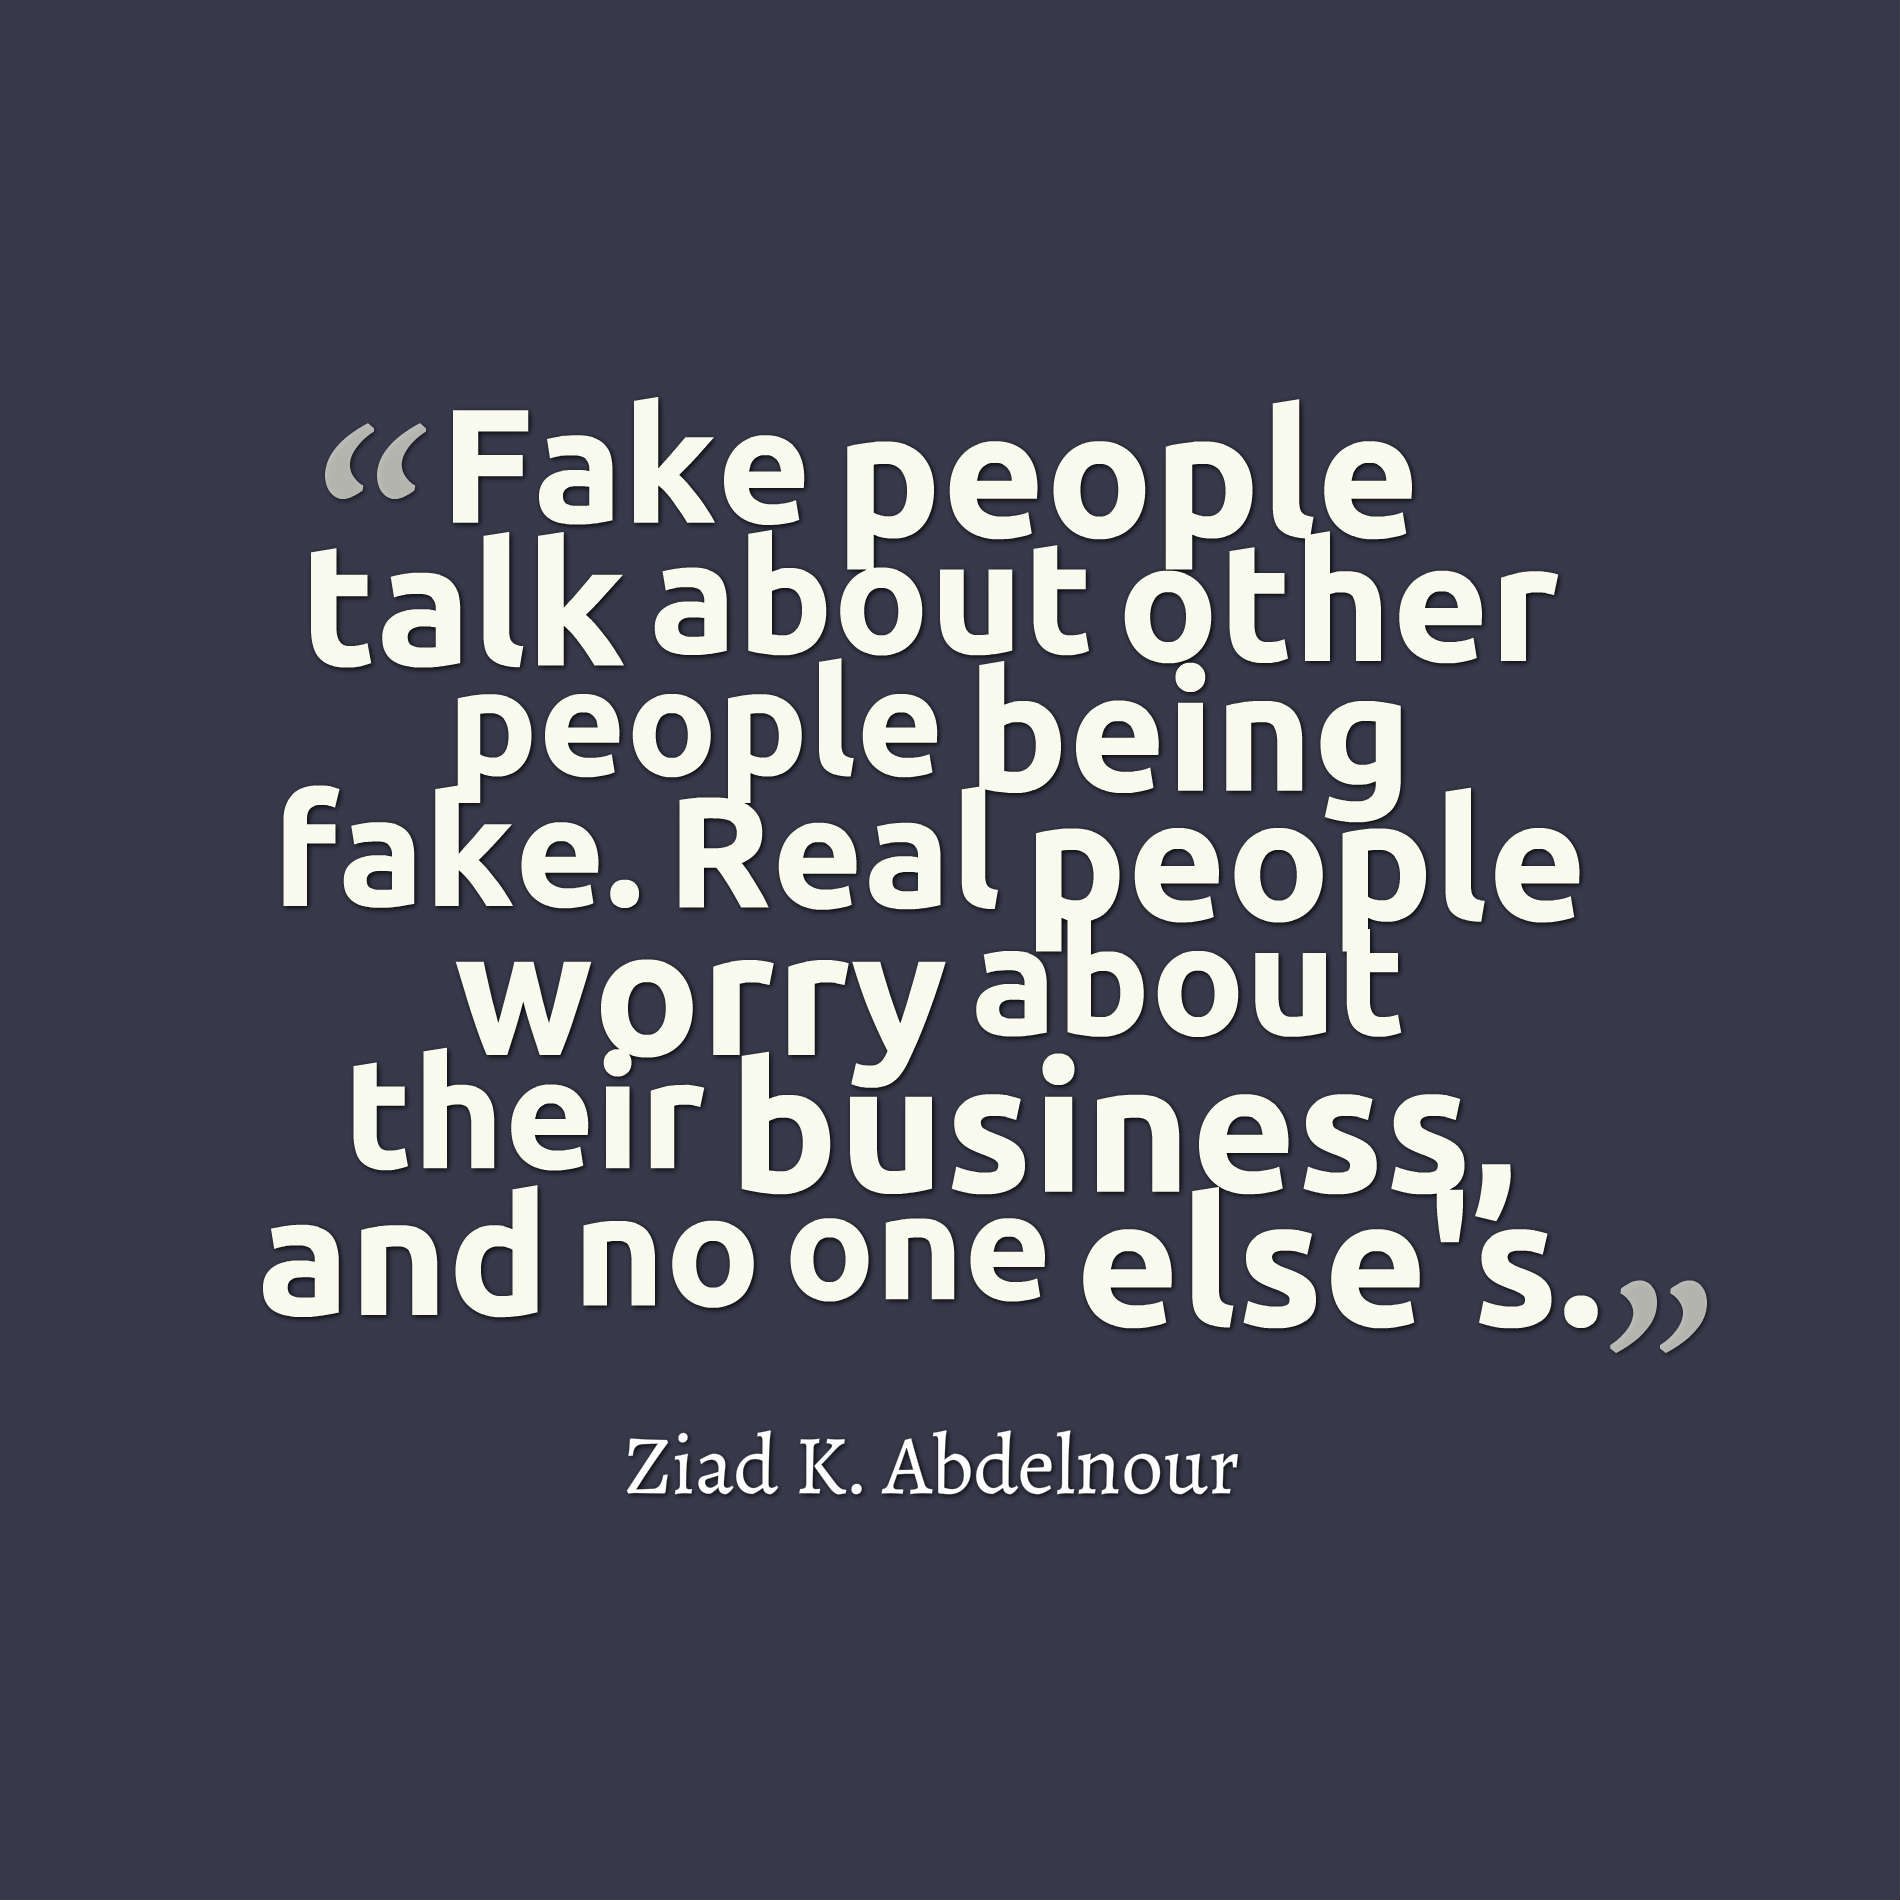 Fake people talk about other people being fake. Real people worry about their business, and no one else's.